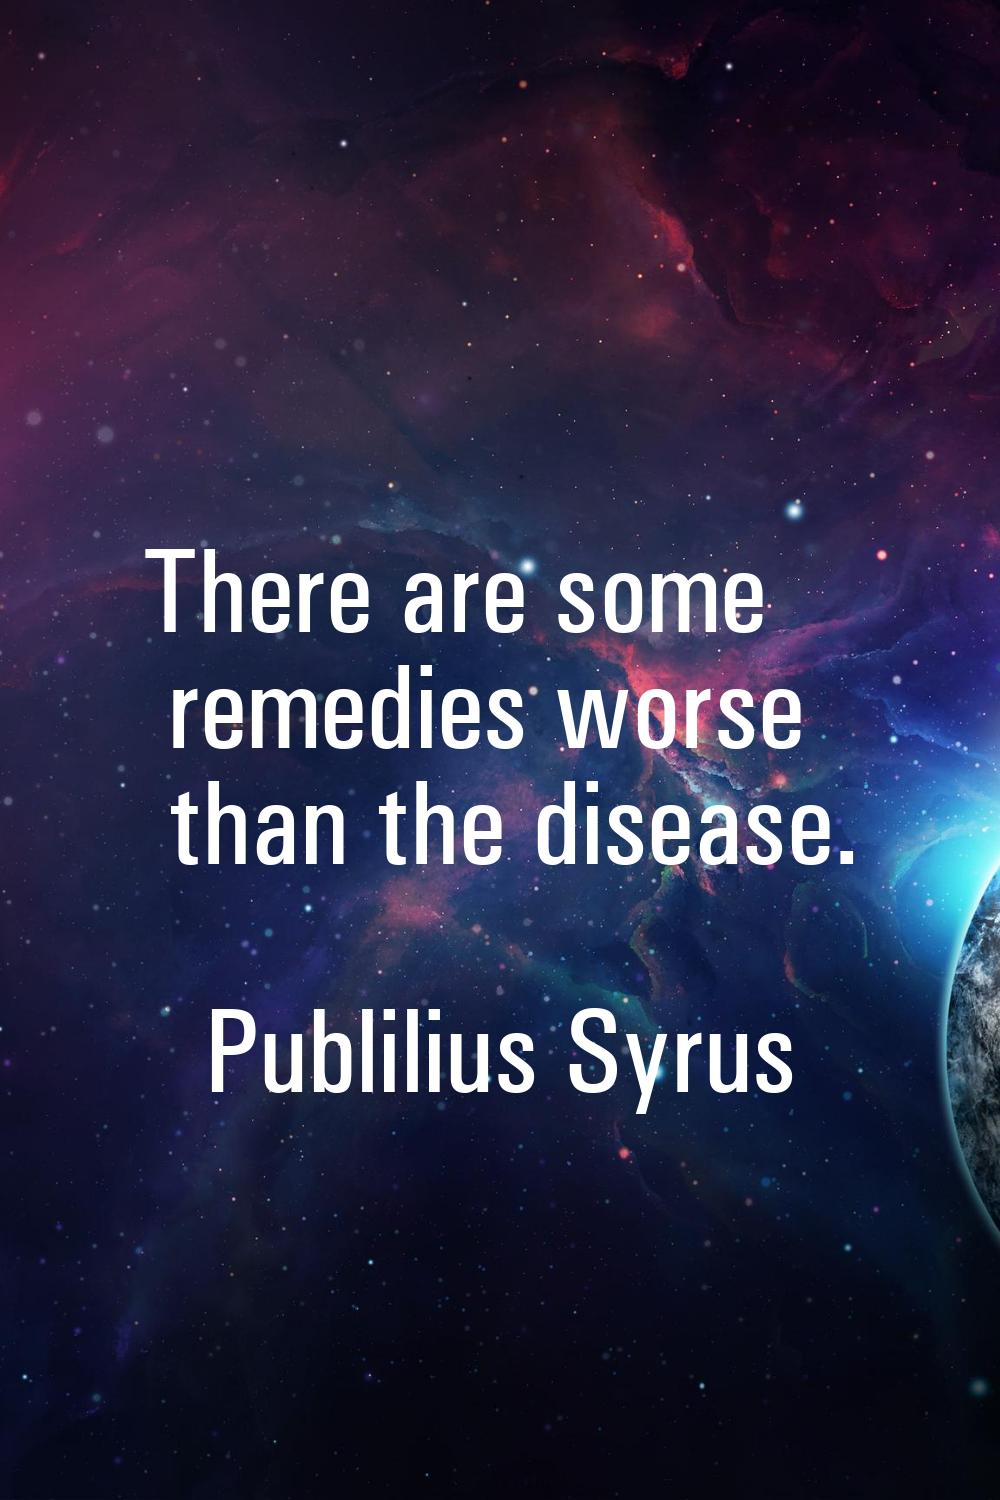 There are some remedies worse than the disease.